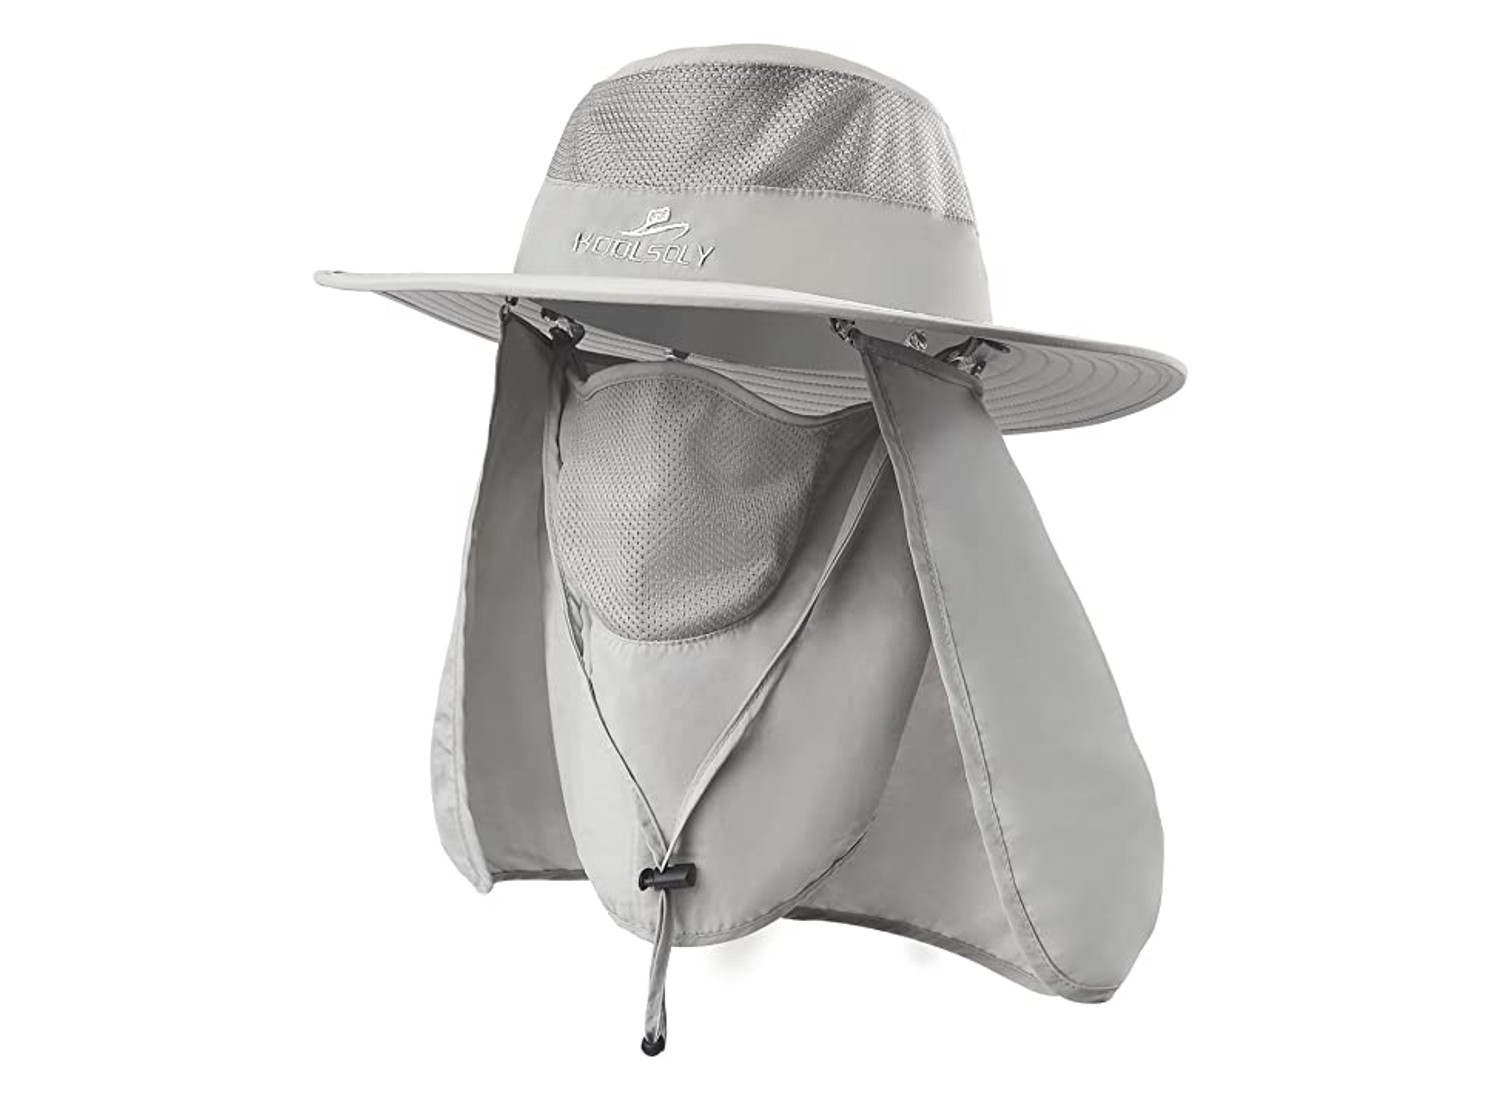 Storfisk fishing & more Boonie hat bush hat sun hat made of ripstop material with ventilation eyelets chin strap. 